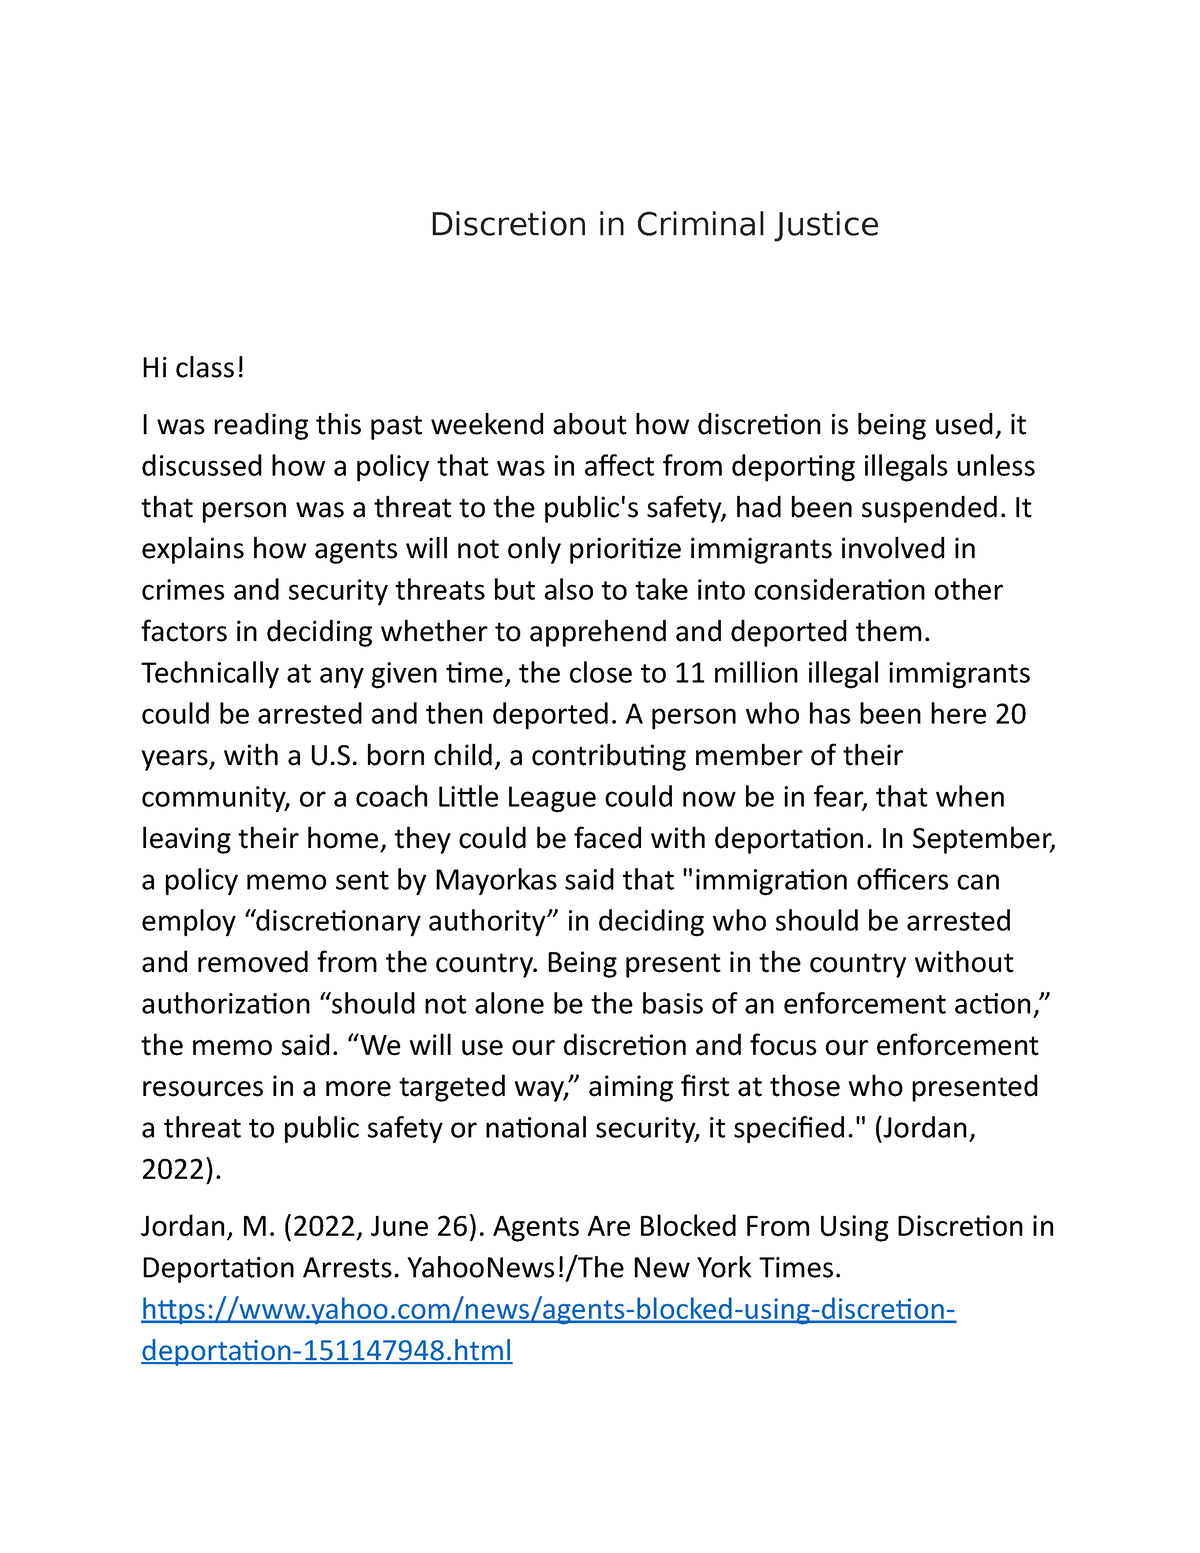 the role of discretion in the criminal justice system essay